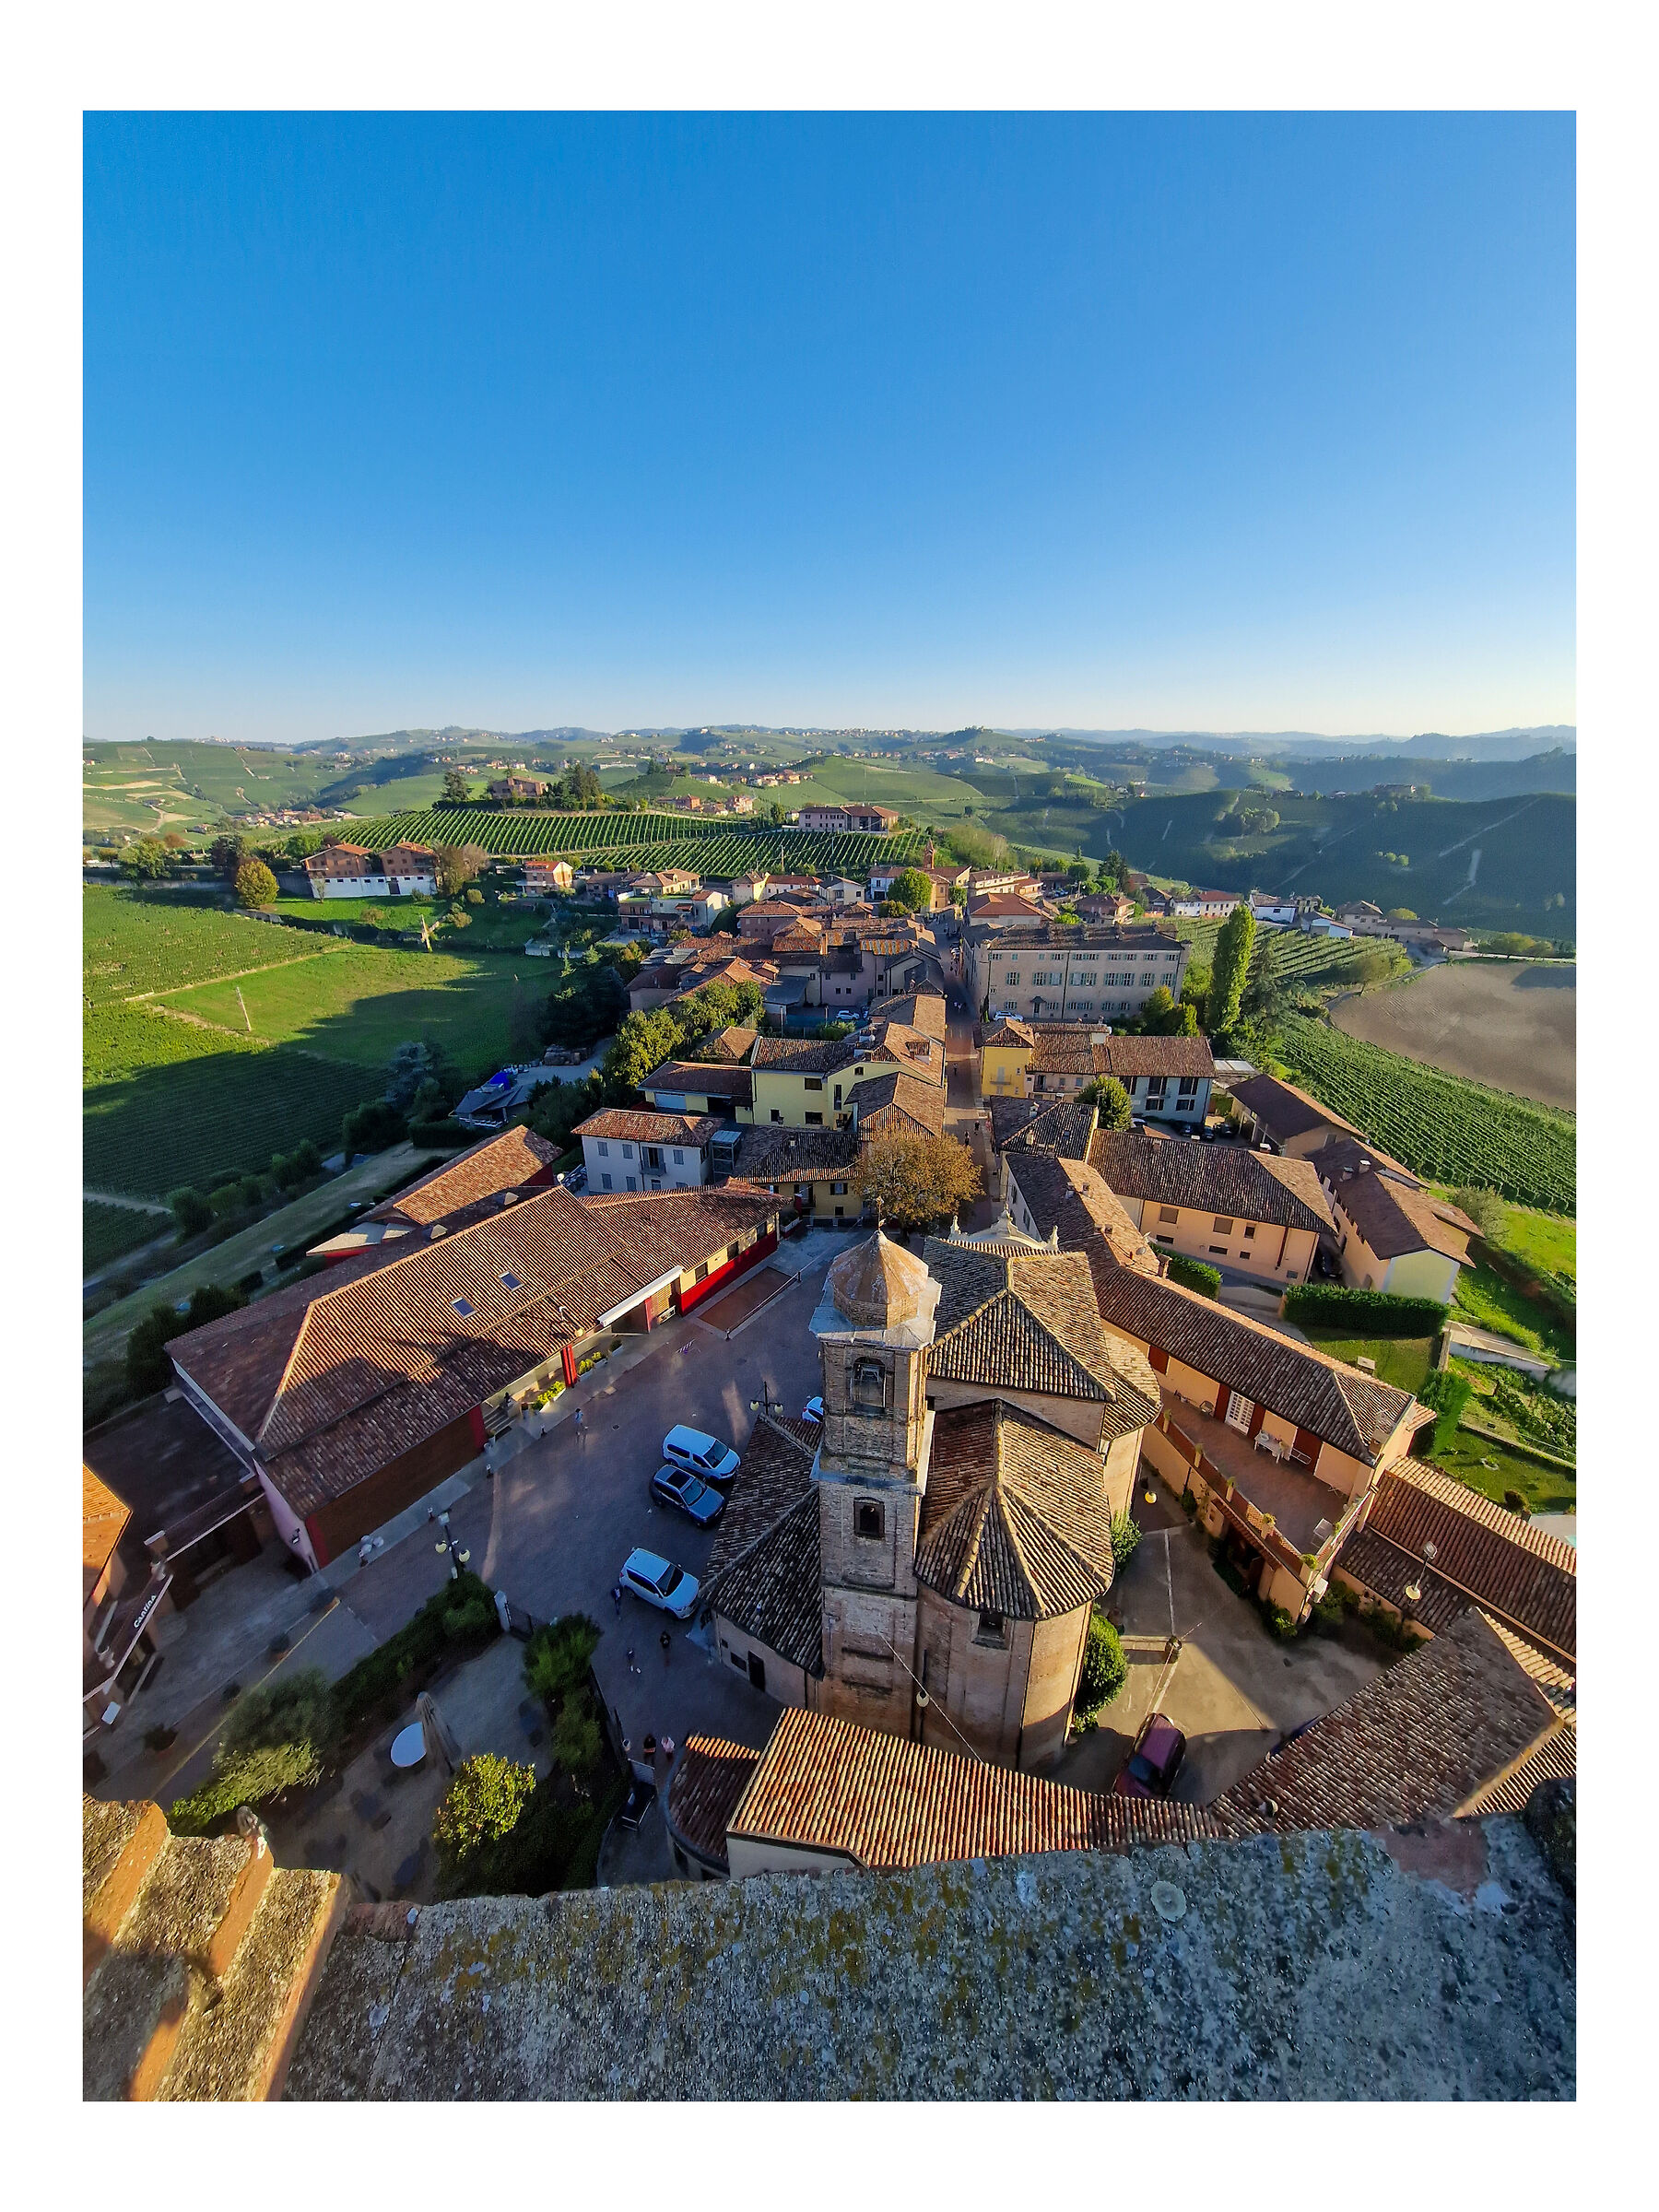 Barbaresco from its tower...